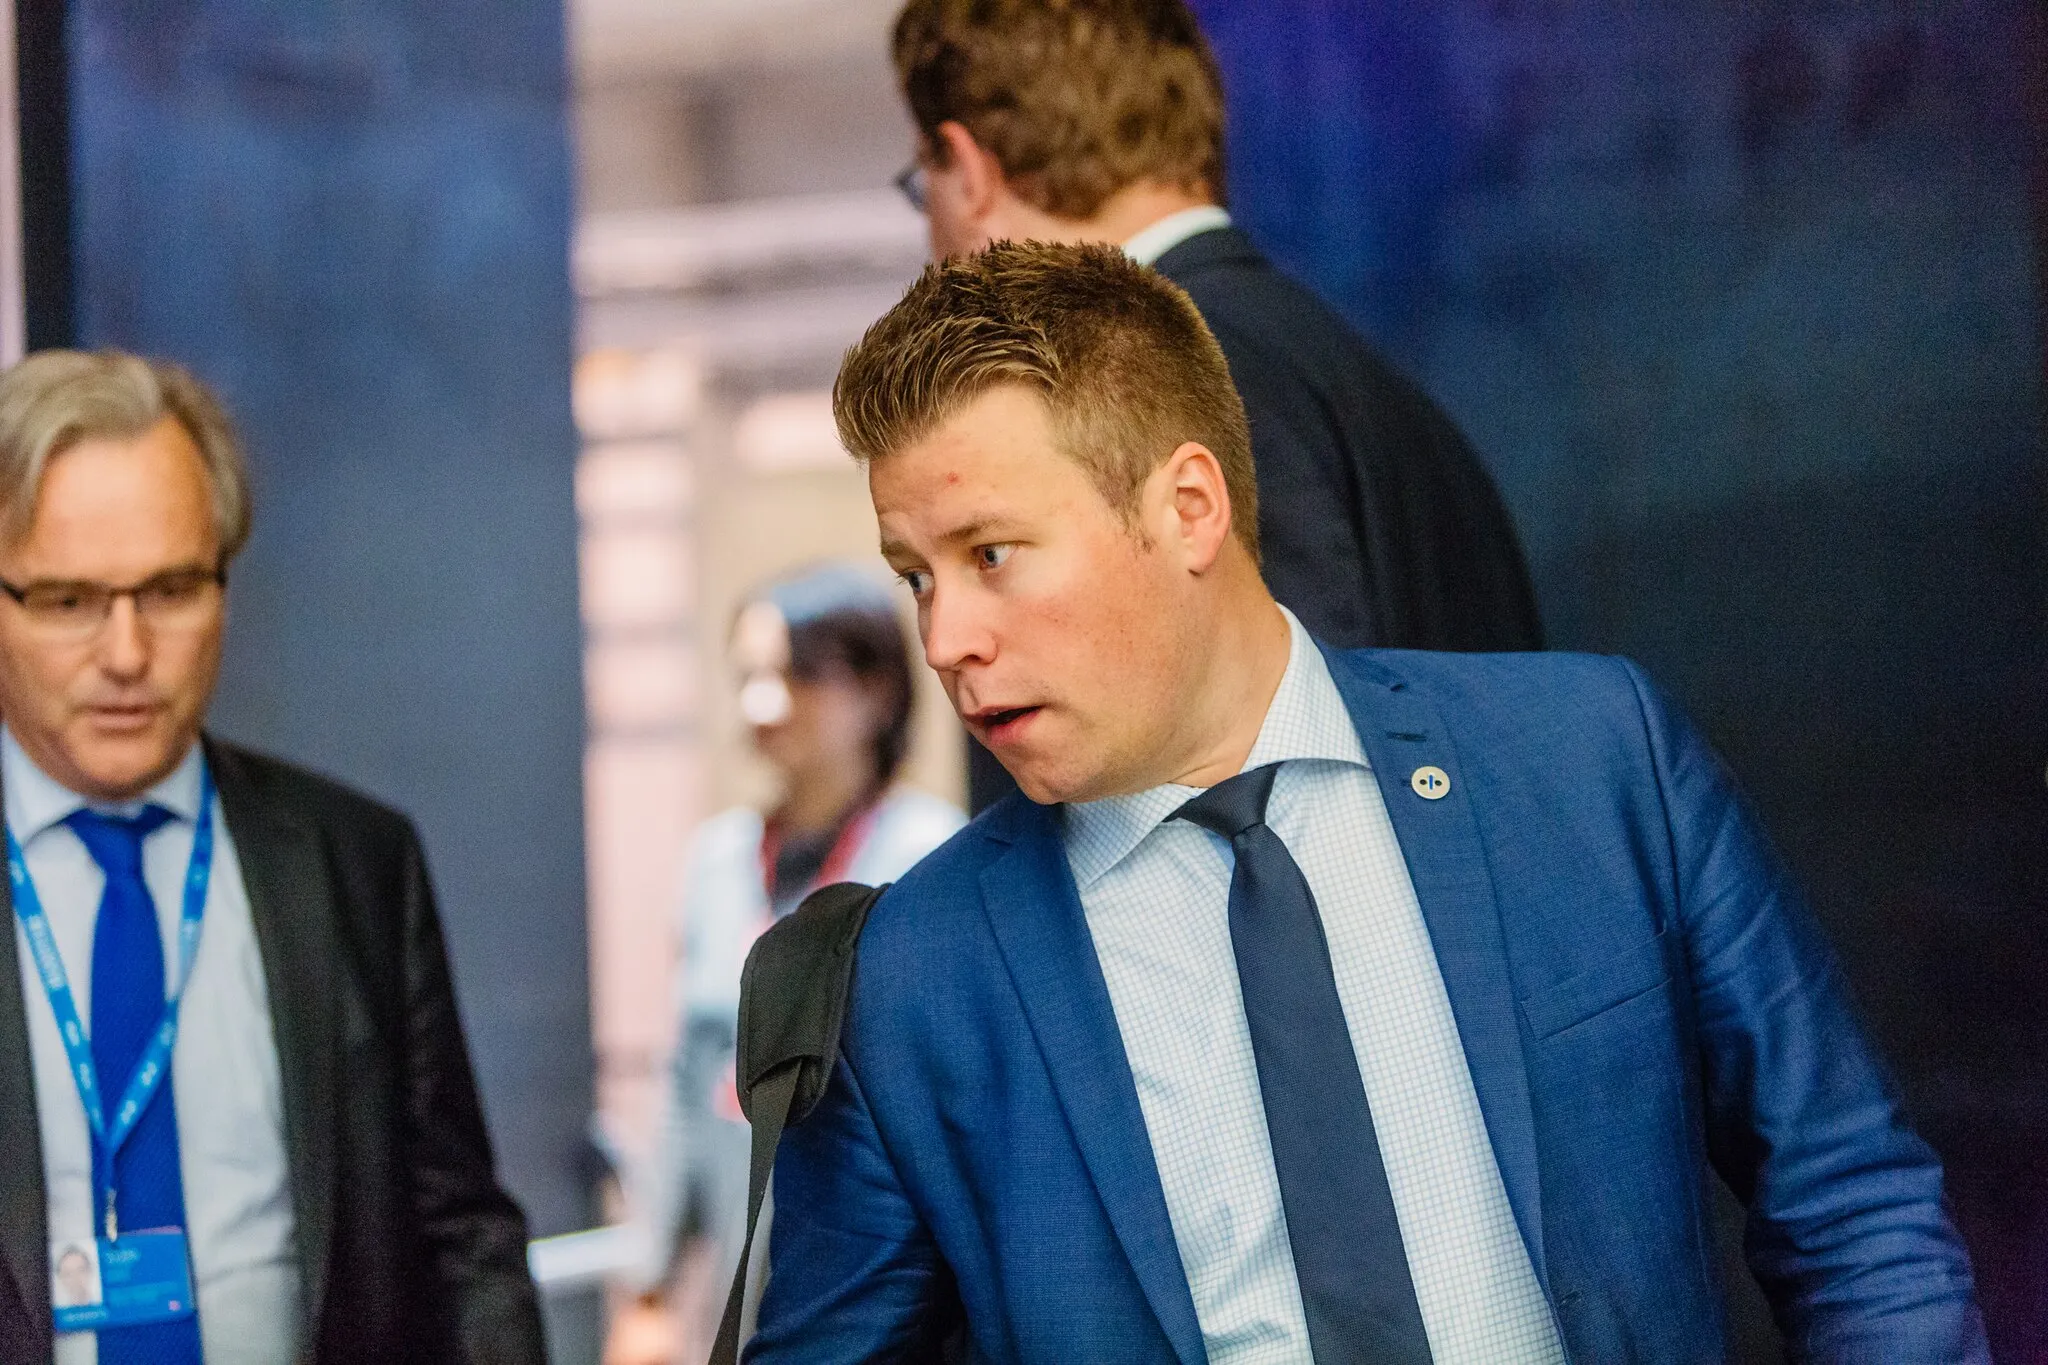 Photo showing: (l-r) Elnar Remi Holmen, State Secretary, Ministry of Petroleum and Energy, Norway

Photo: Arno Mikkor (EU2017EE)